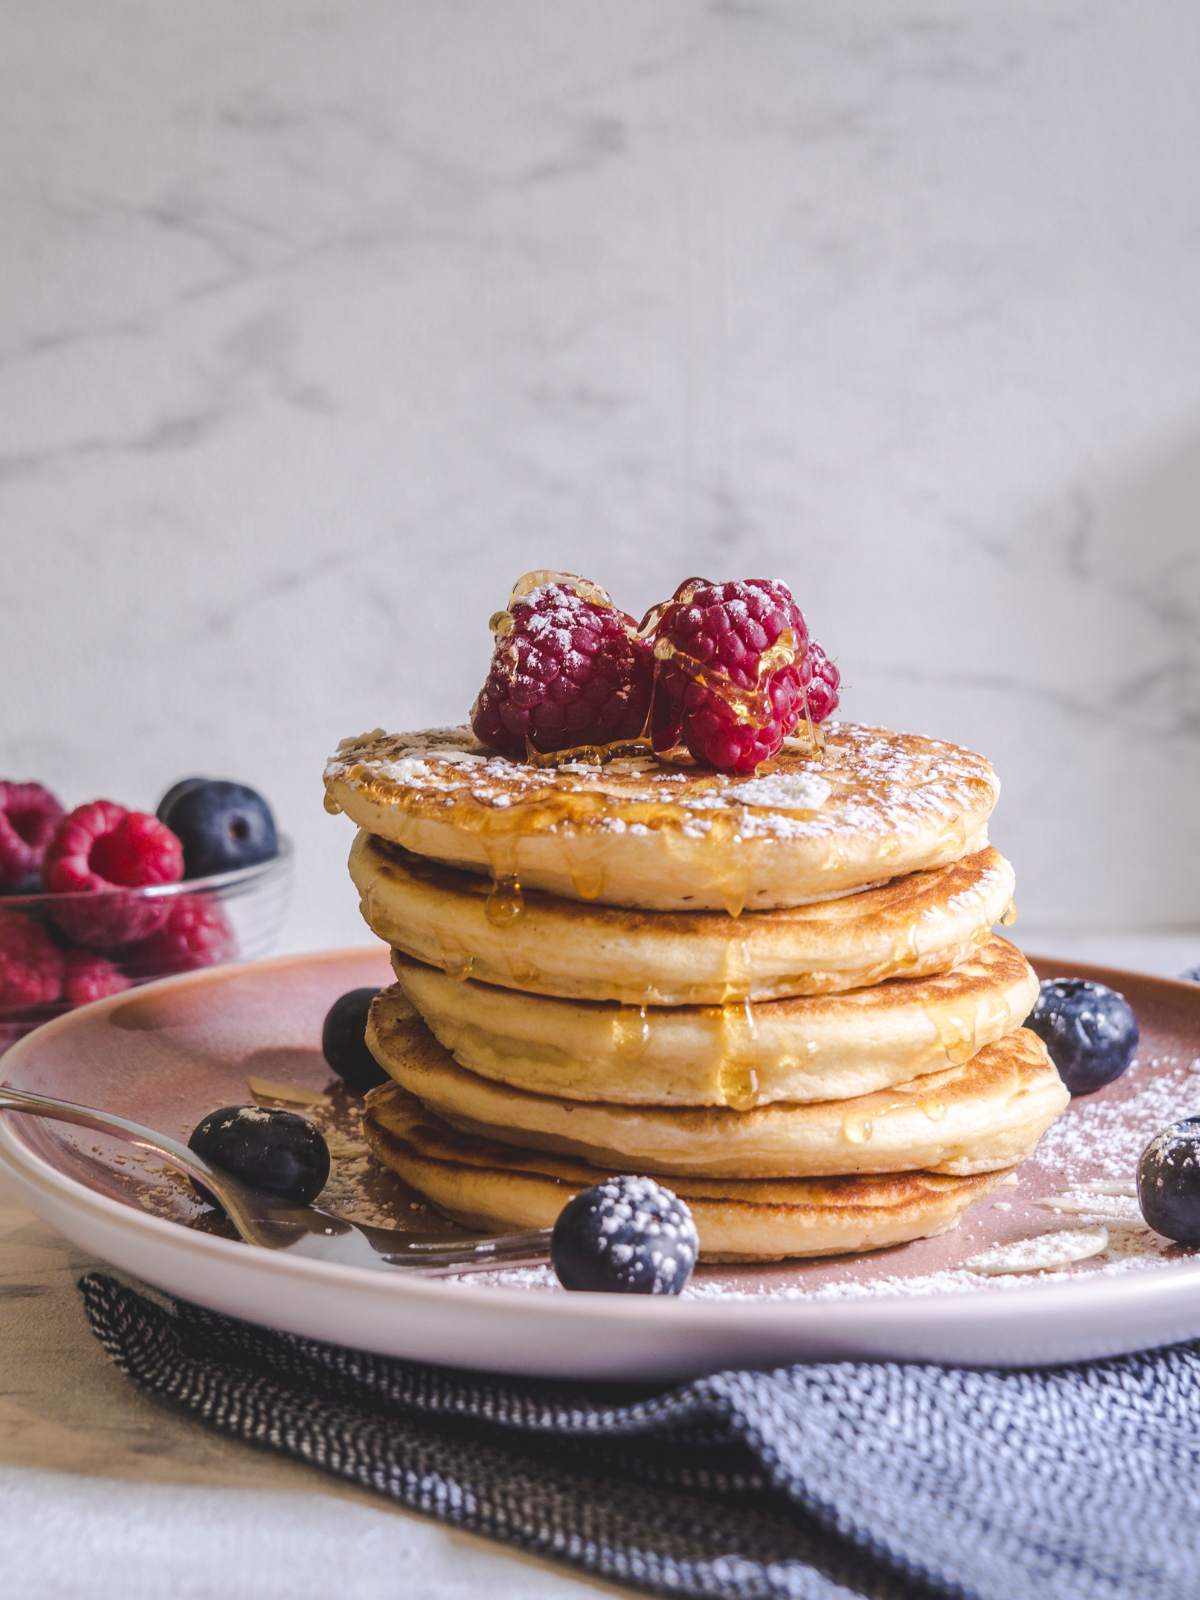 A Stack of Pancakes with Berries and Powdered Sugar